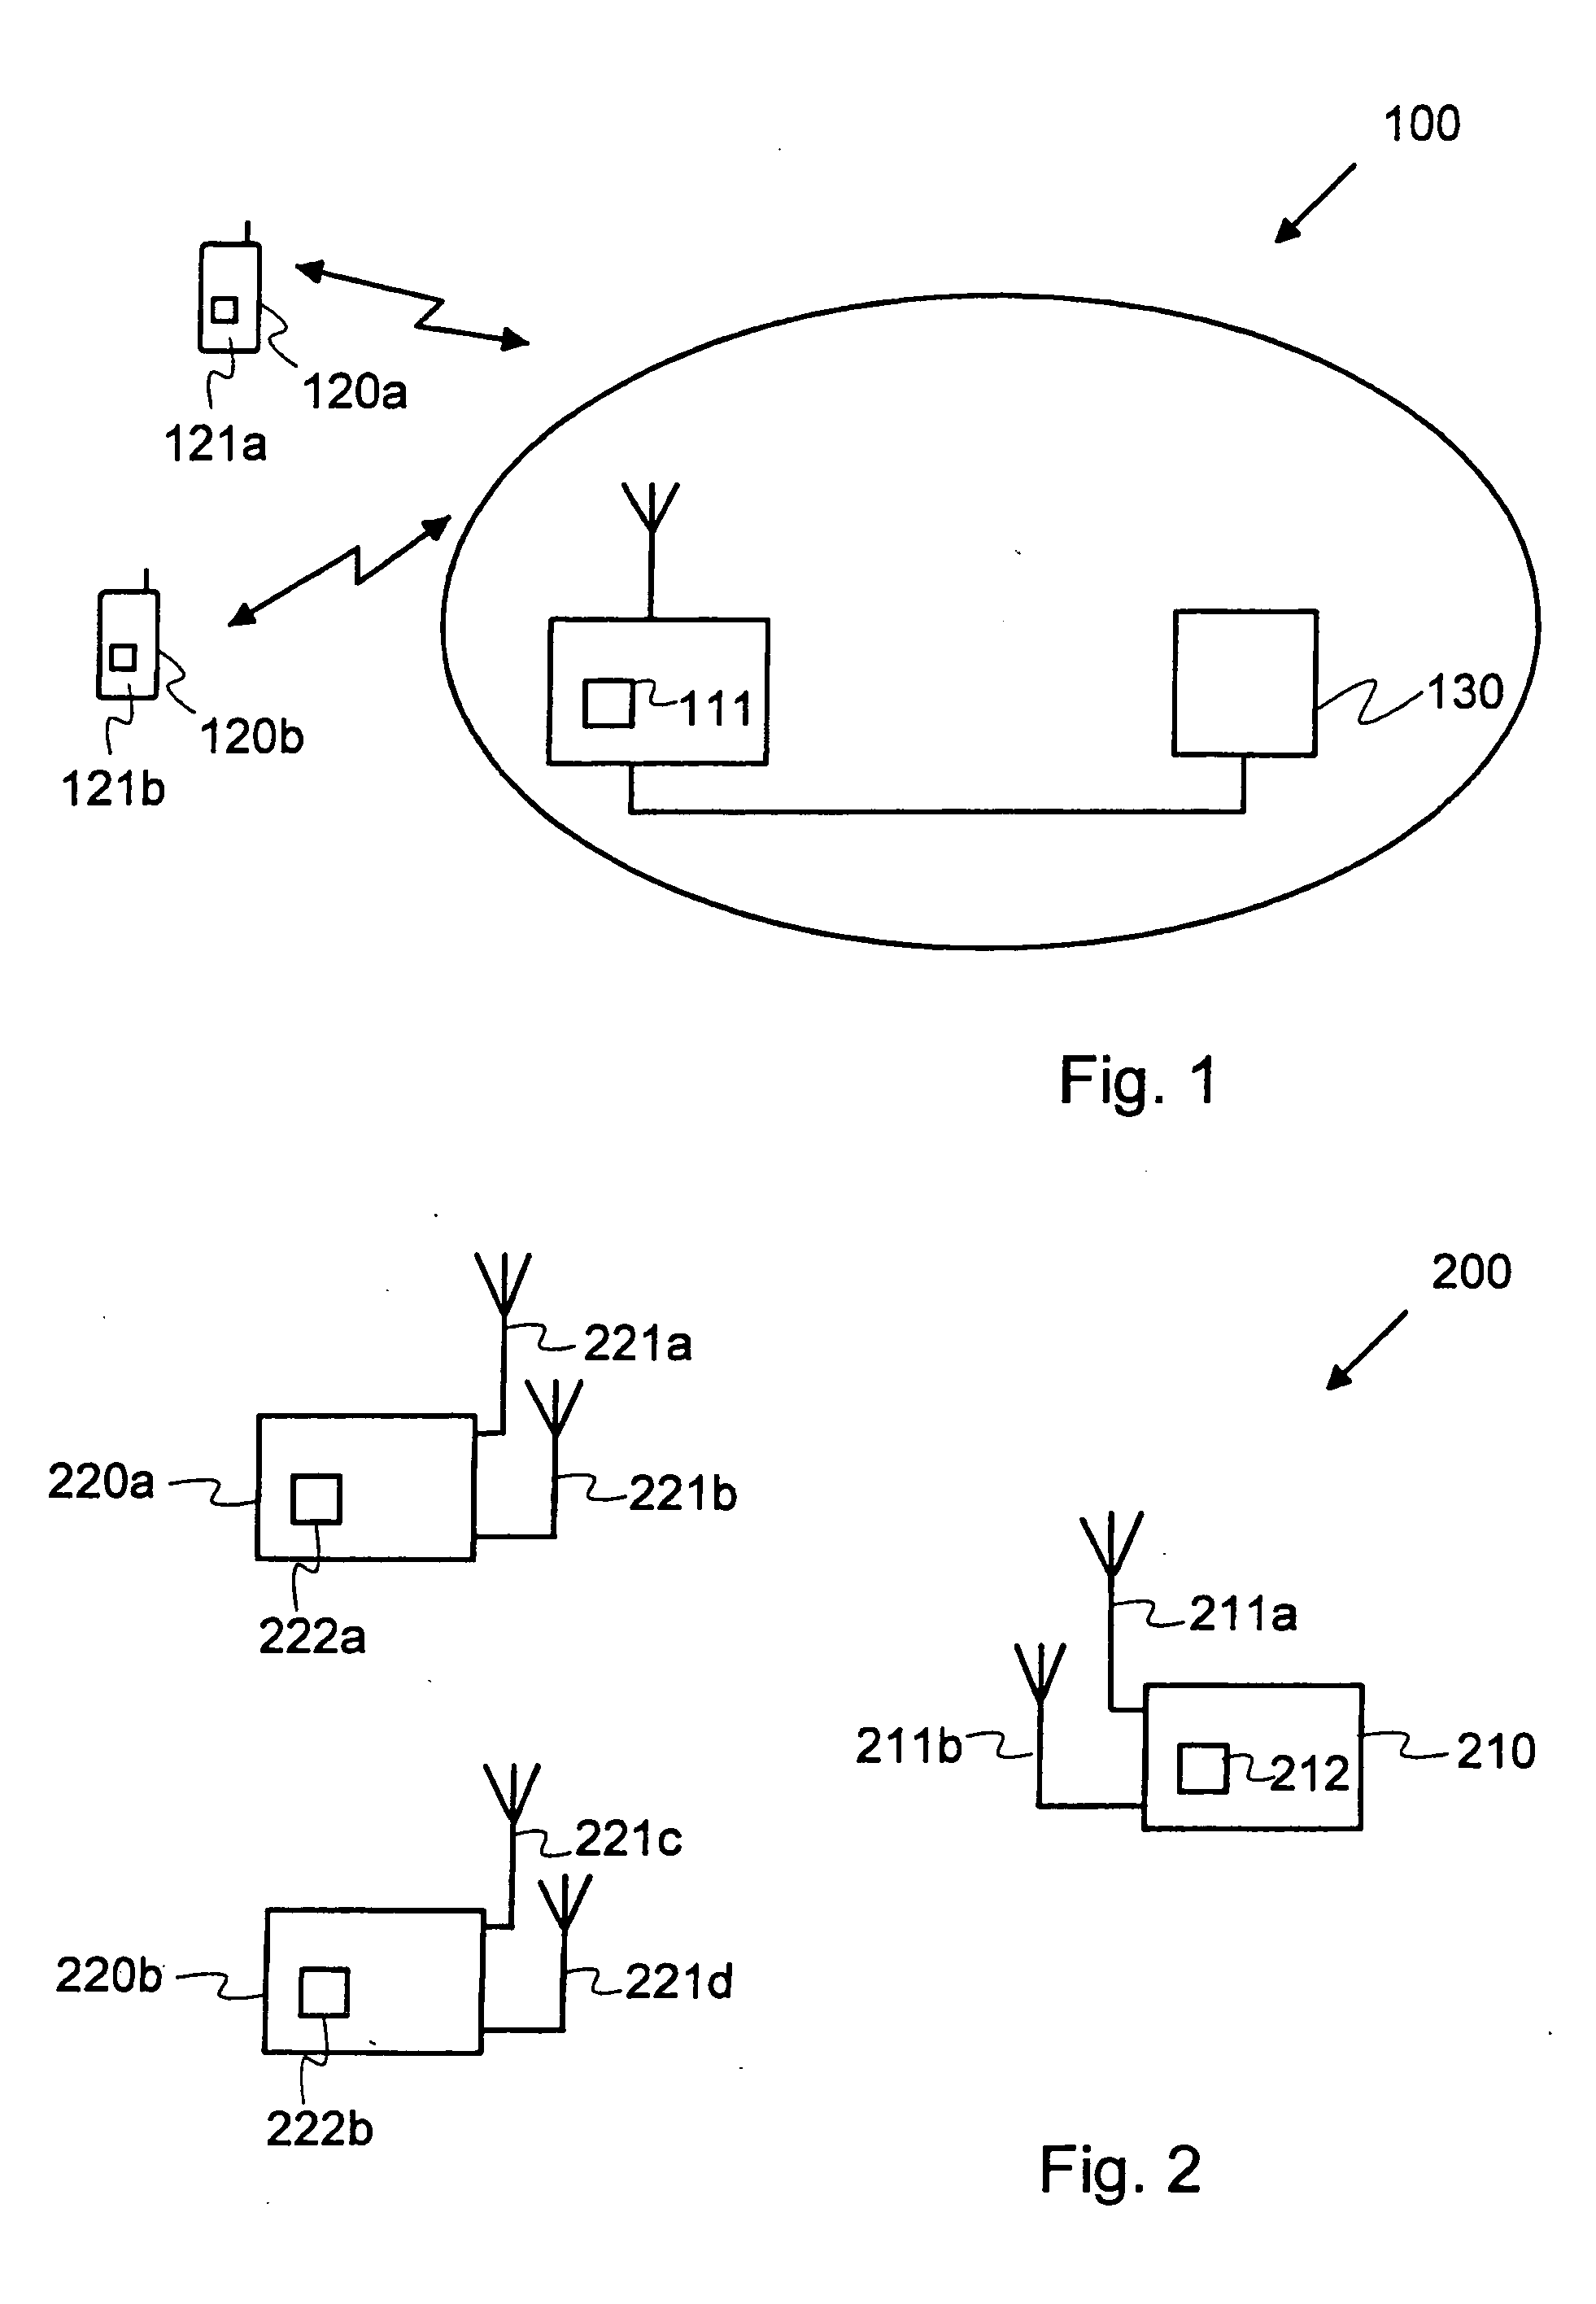 Multi-user multicarrier allocation in a communication system